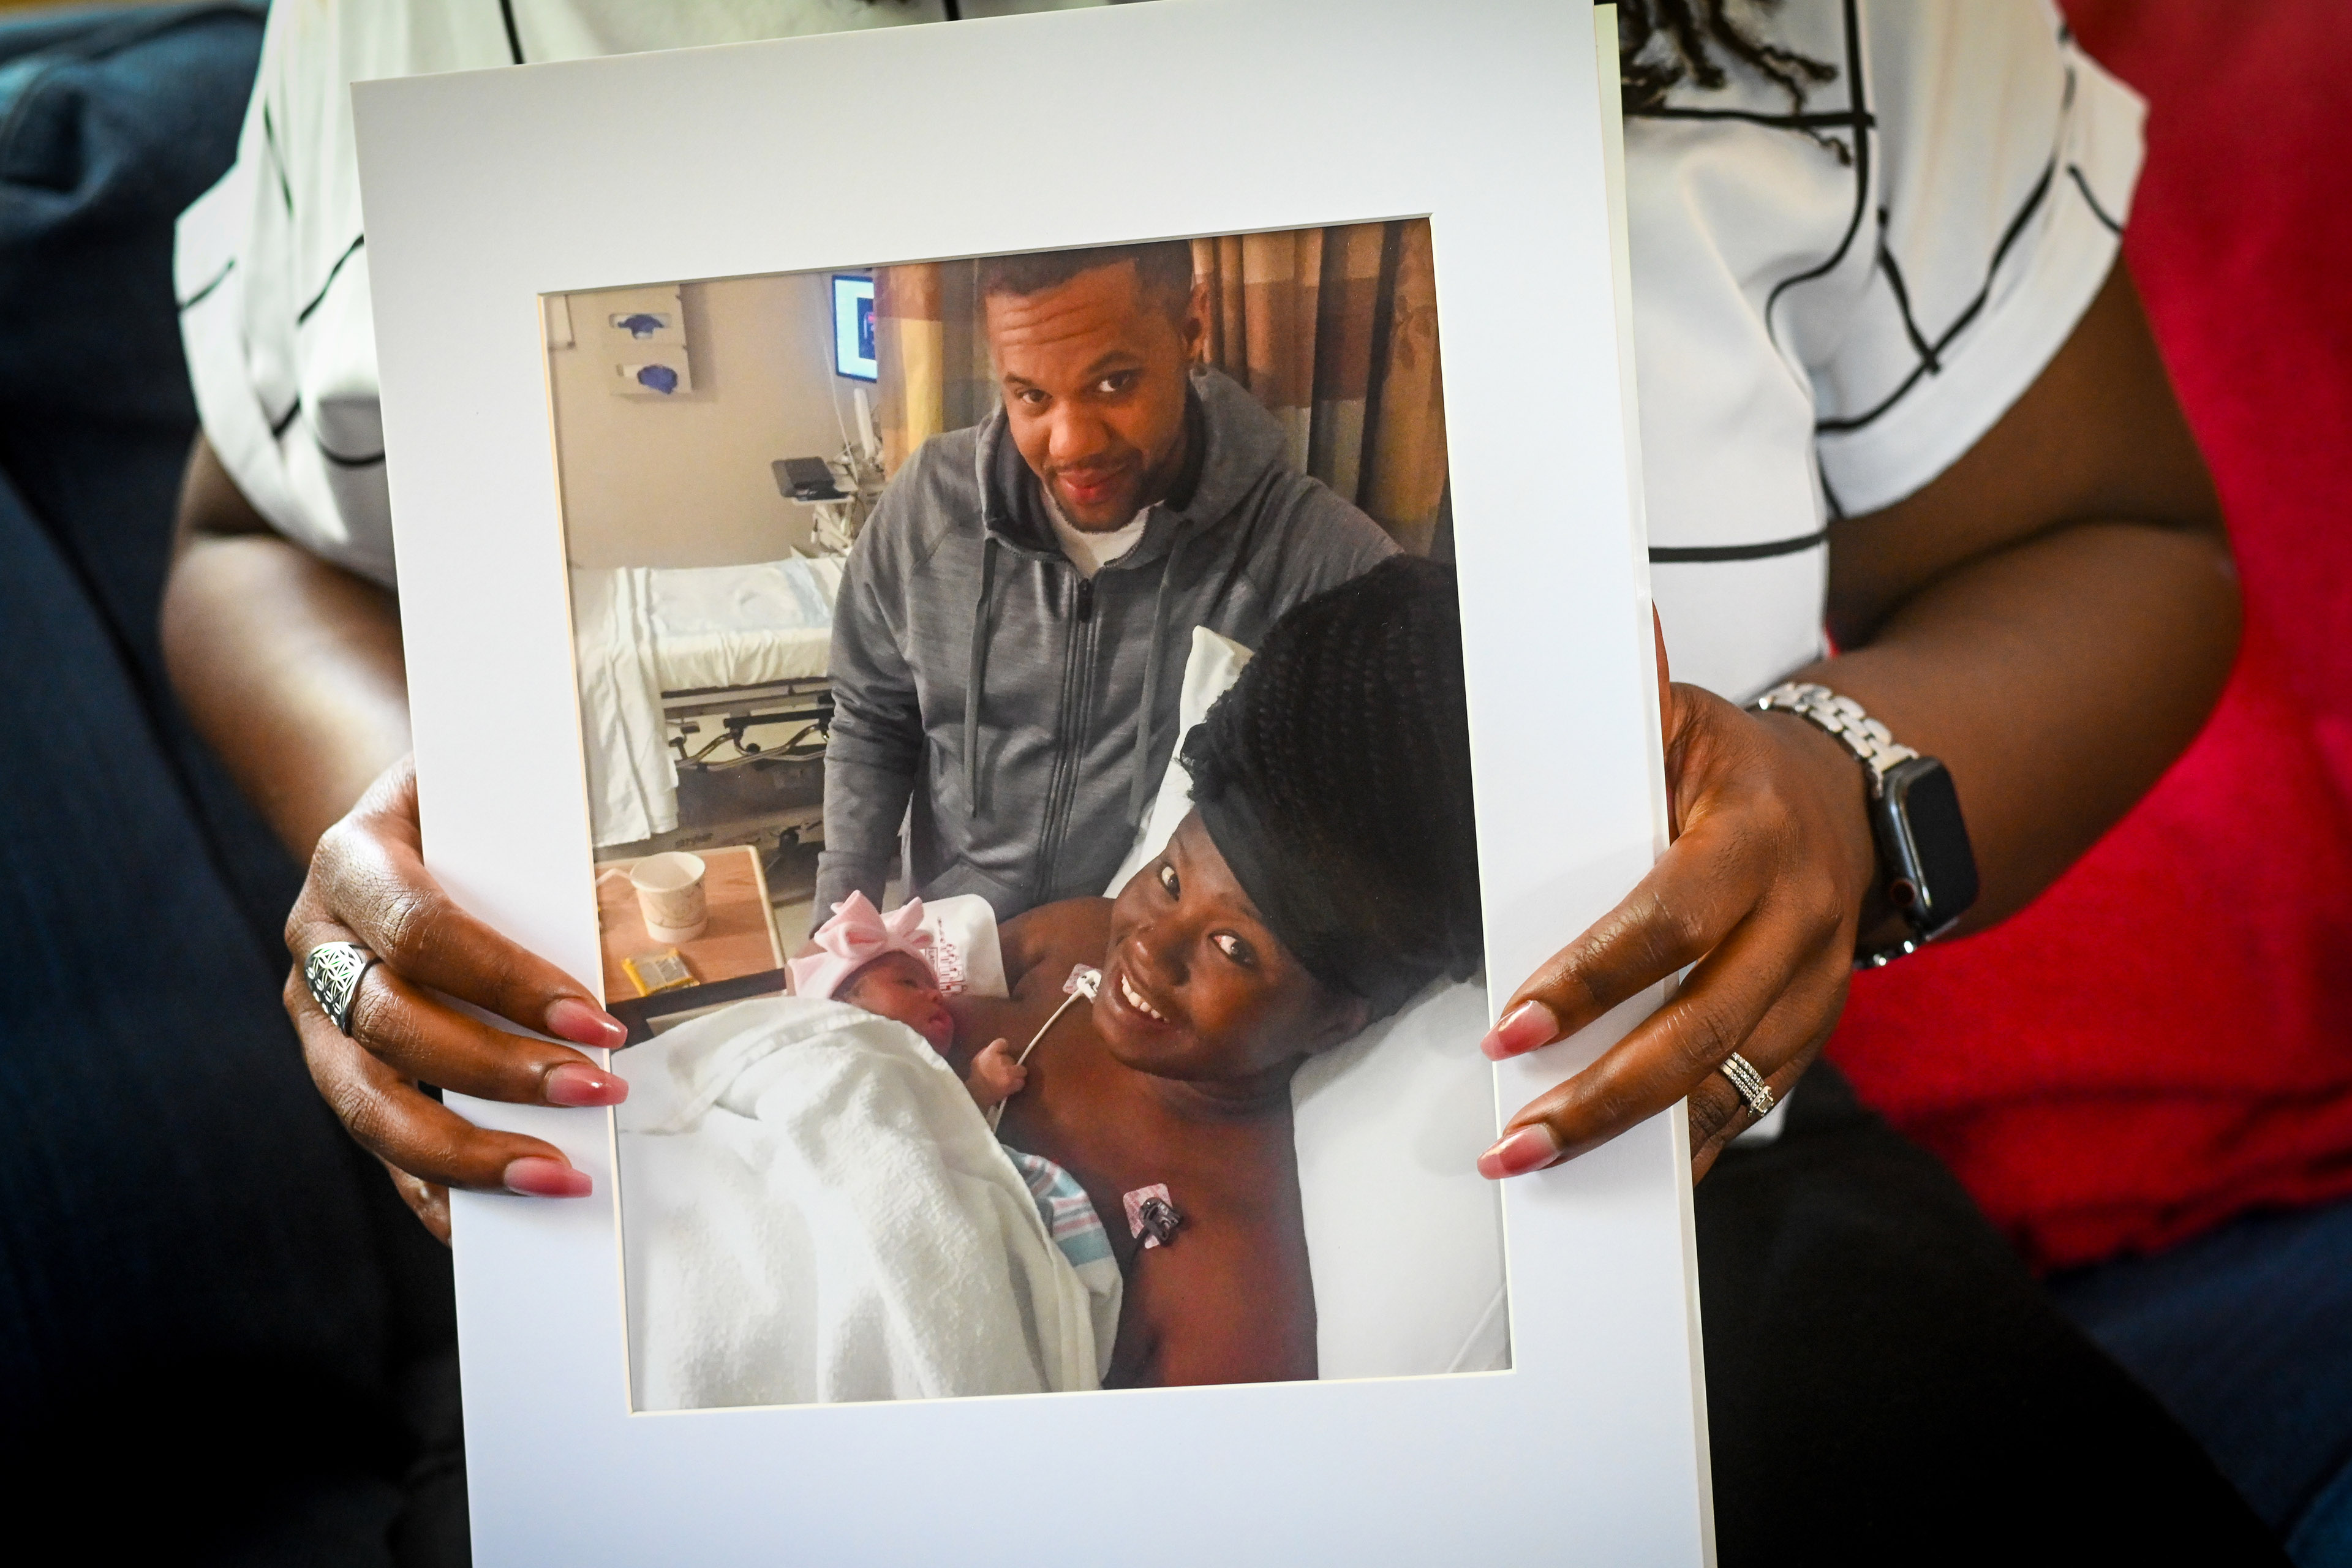 Charity Watkins holds a photo of herself. In the photo, she is lying in a hospital bed with her newborn daughter. Her husband stands beside her.